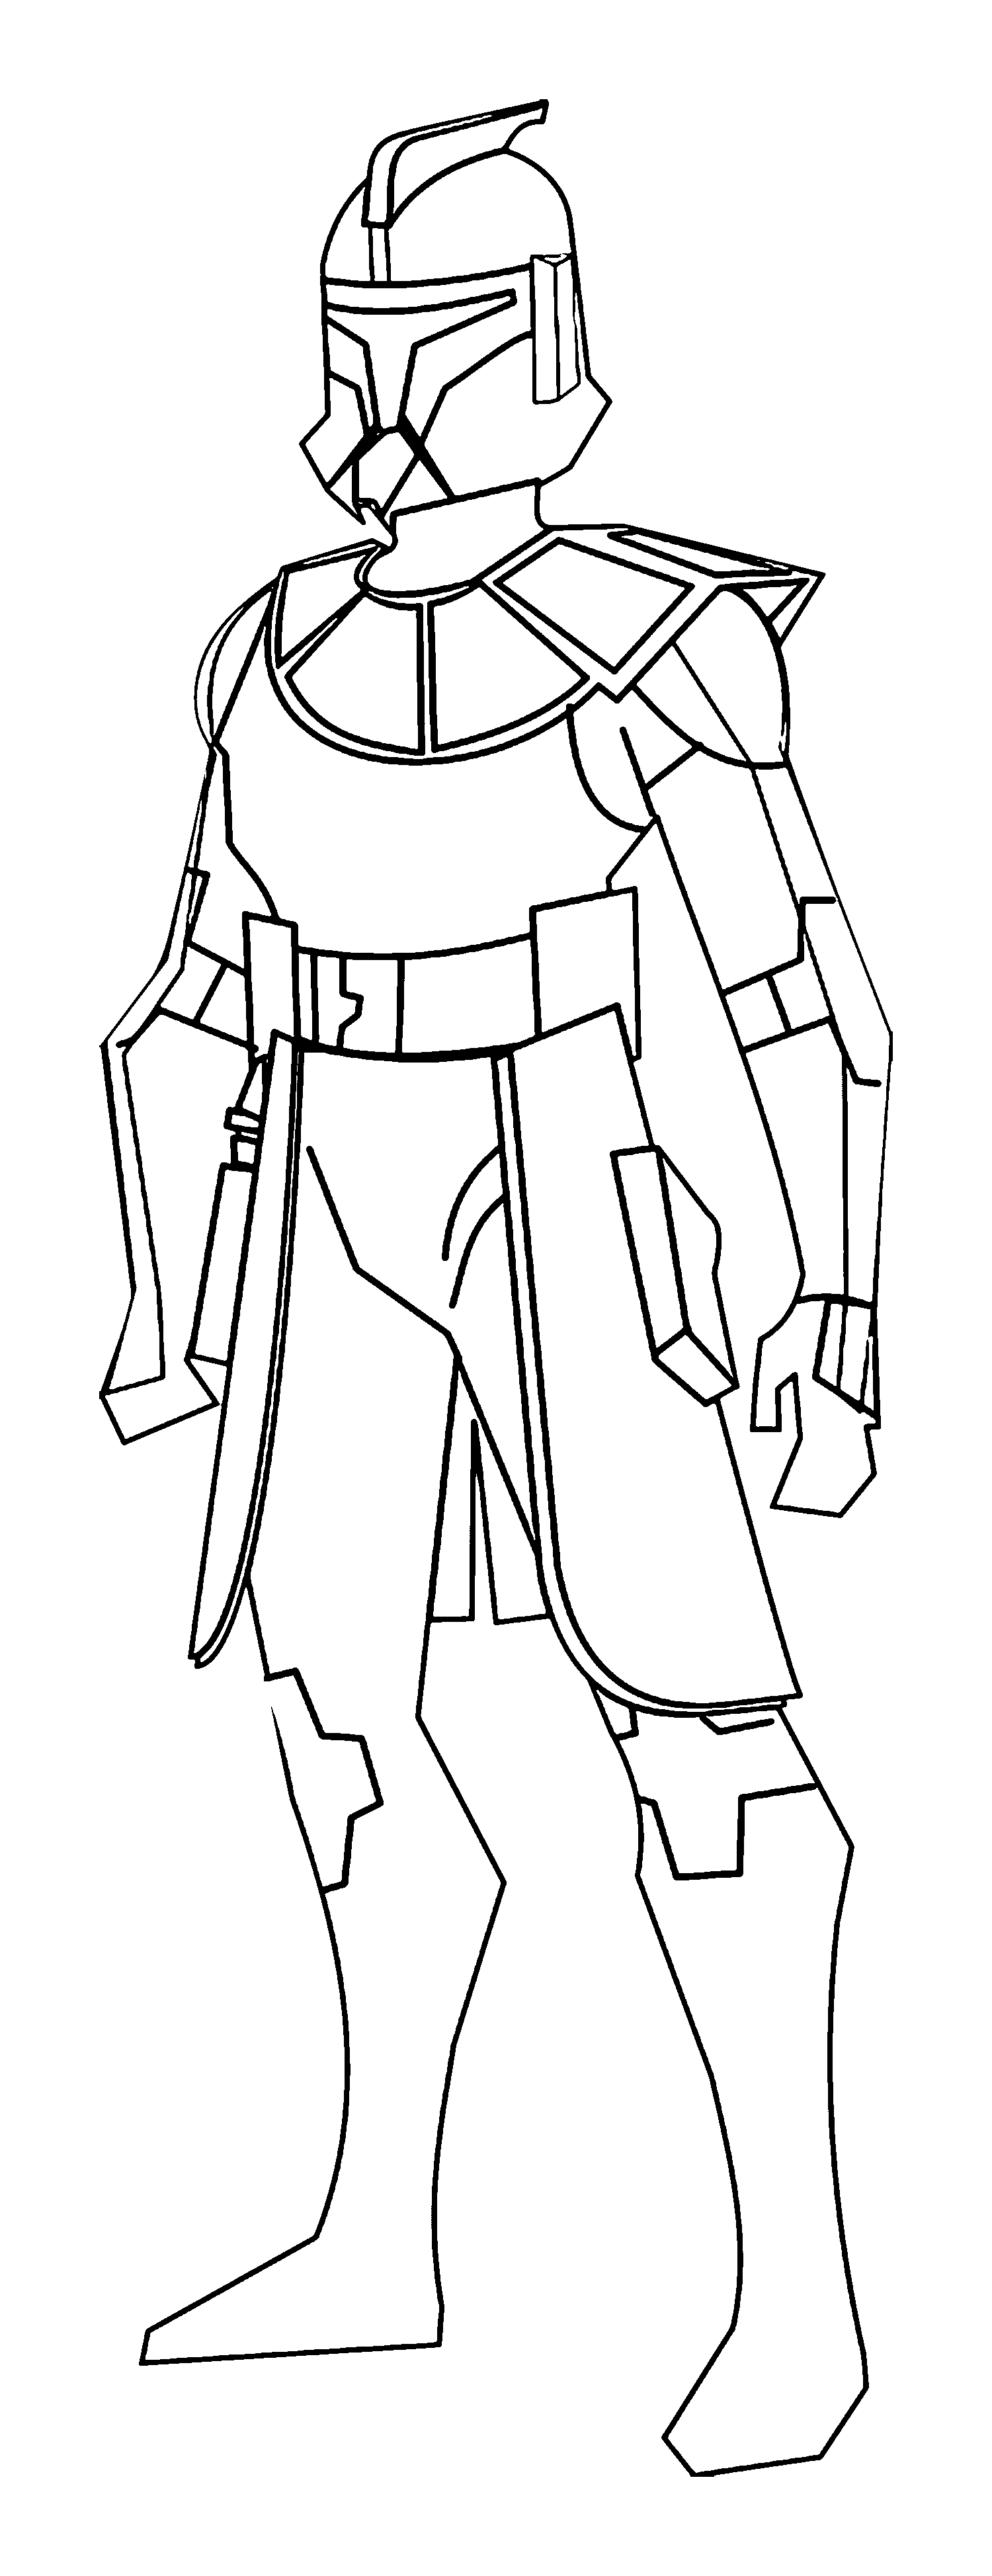 Star Wars Clone Coloring Pages Coloring Pages Clone Trooper Coloring Pages Star Wars Outstanding